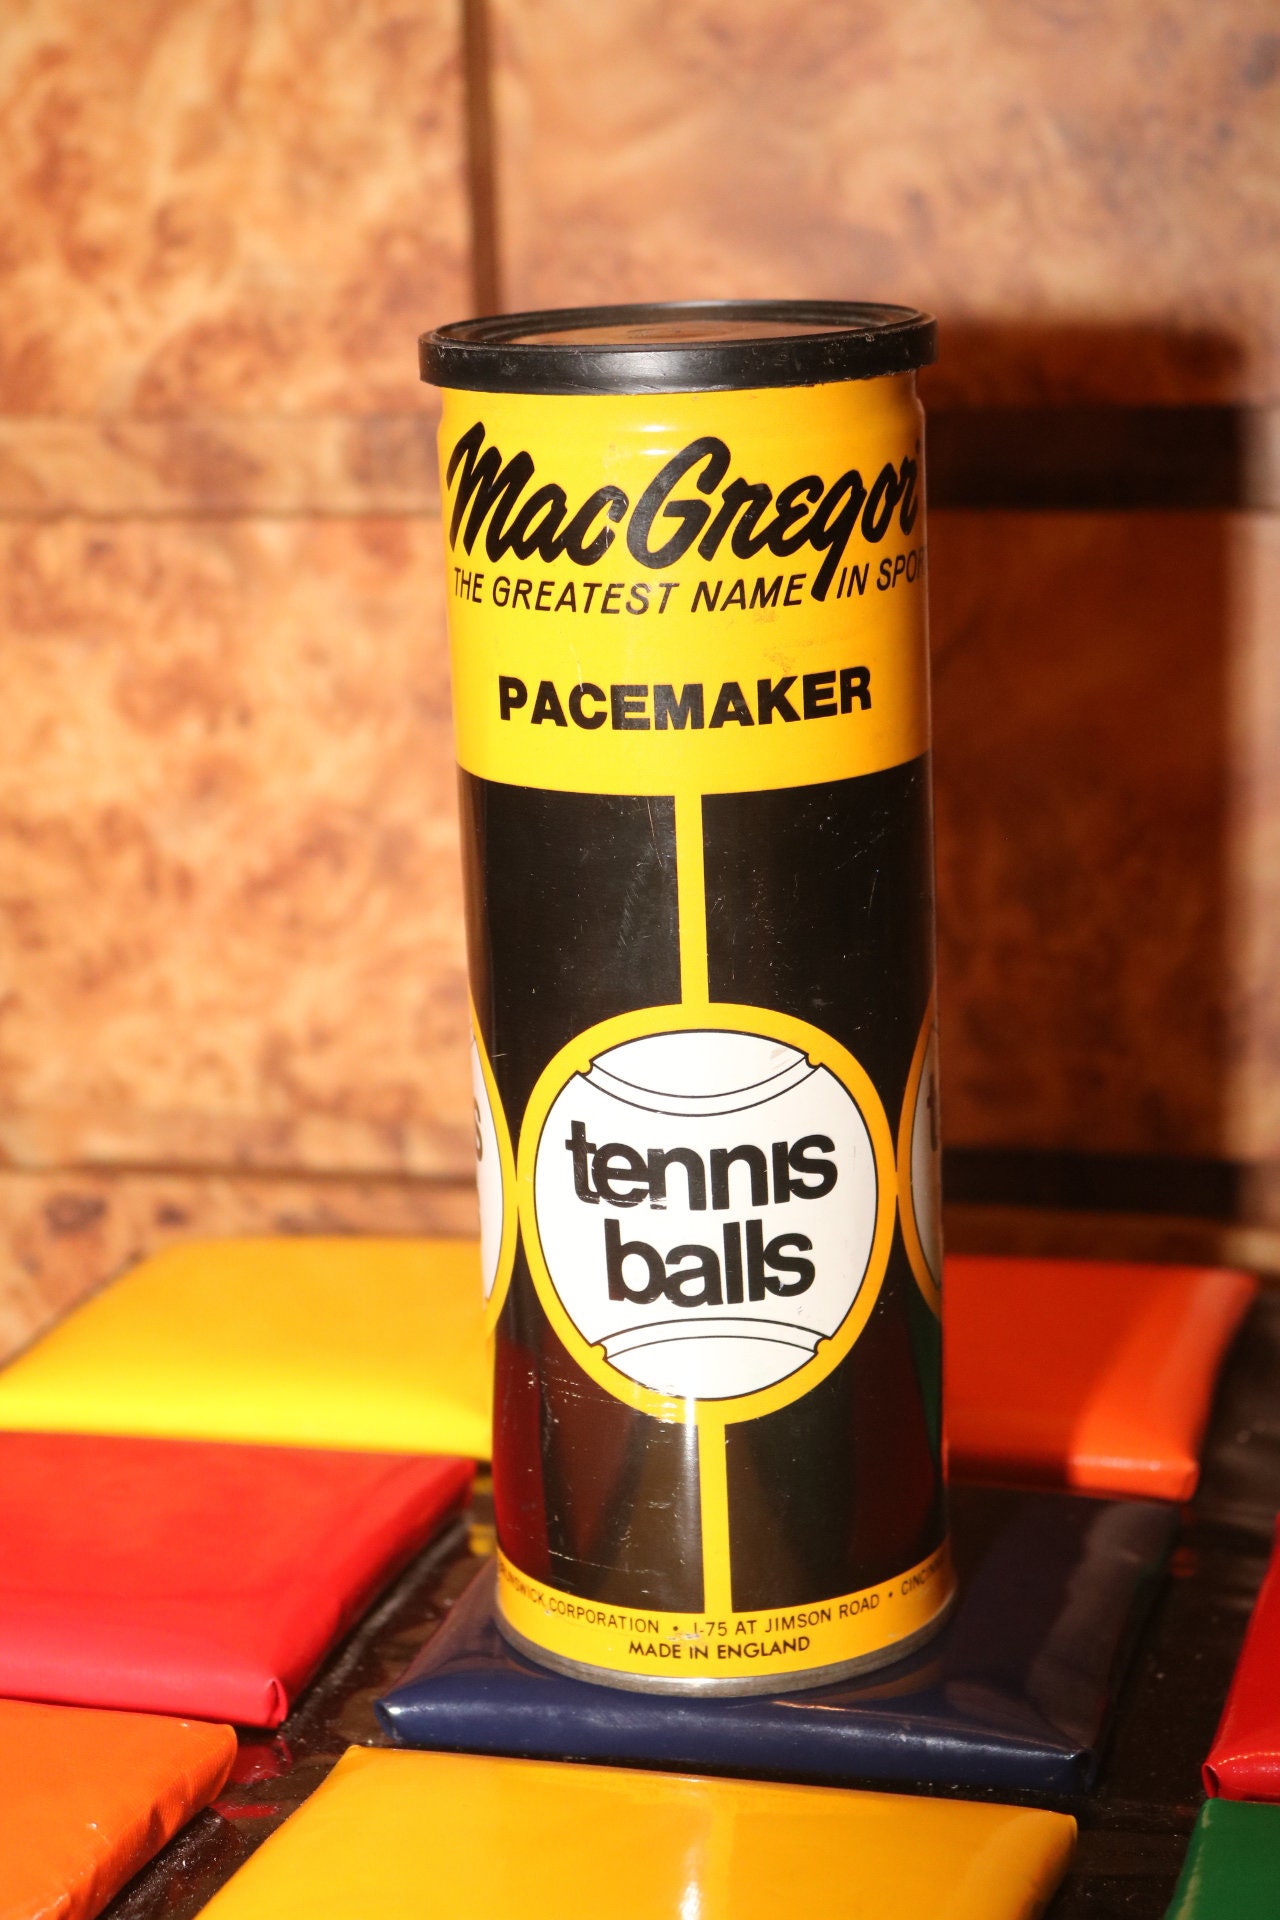 Prices Heart Motif Tennis Balls 1 x 3 Ball Tube Type 2 Balls Made in the UK 